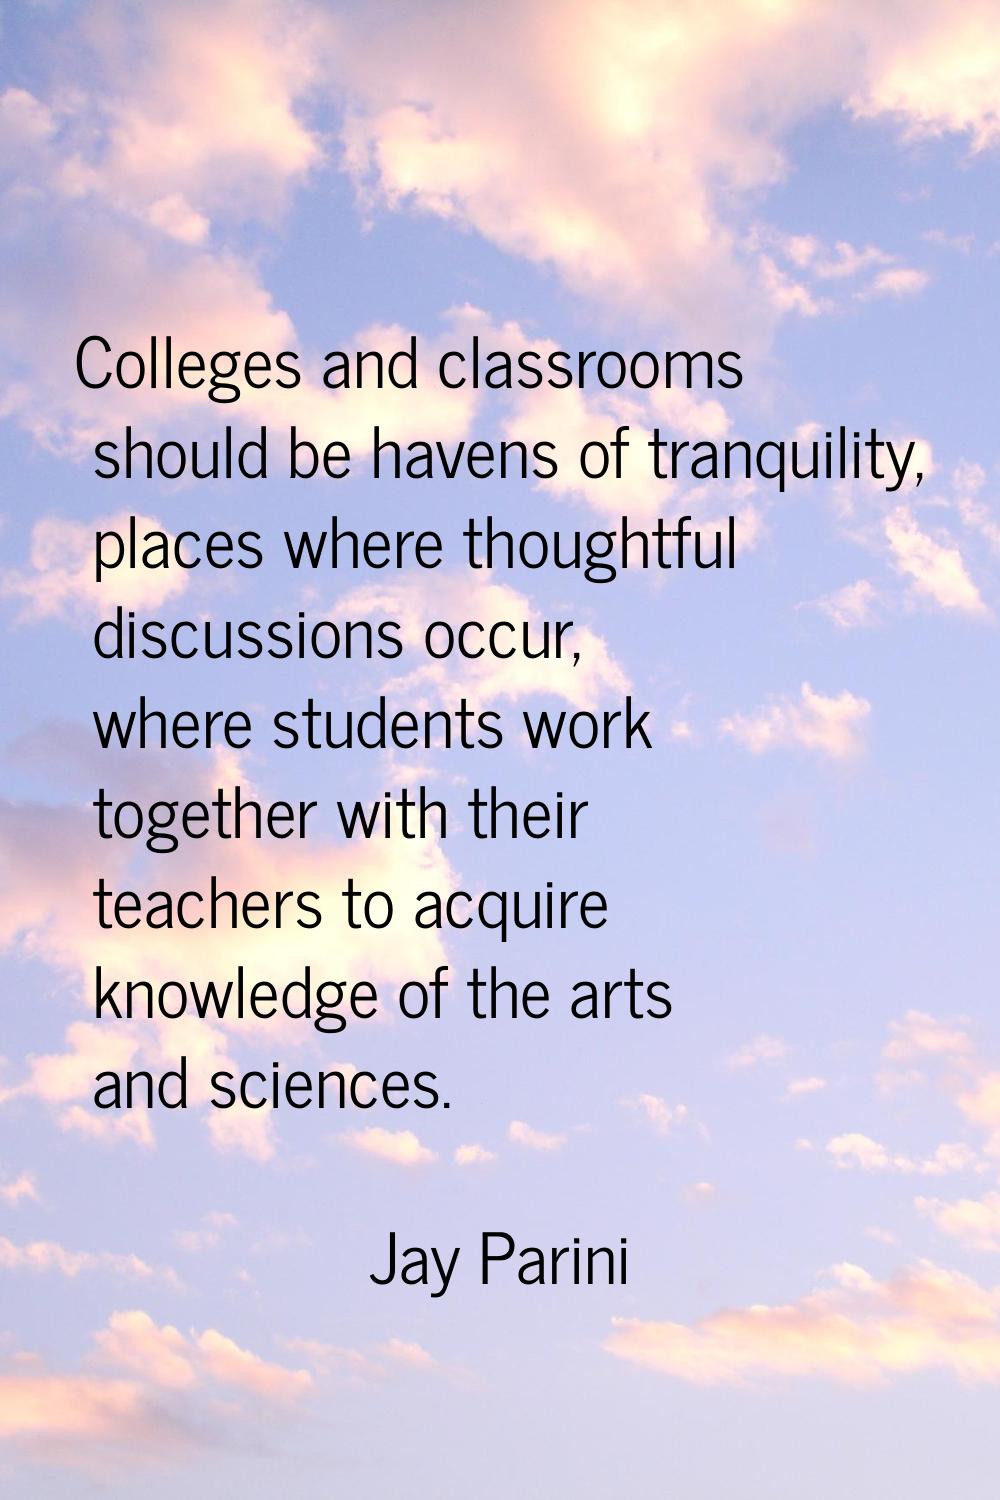 Colleges and classrooms should be havens of tranquility, places where thoughtful discussions occur,